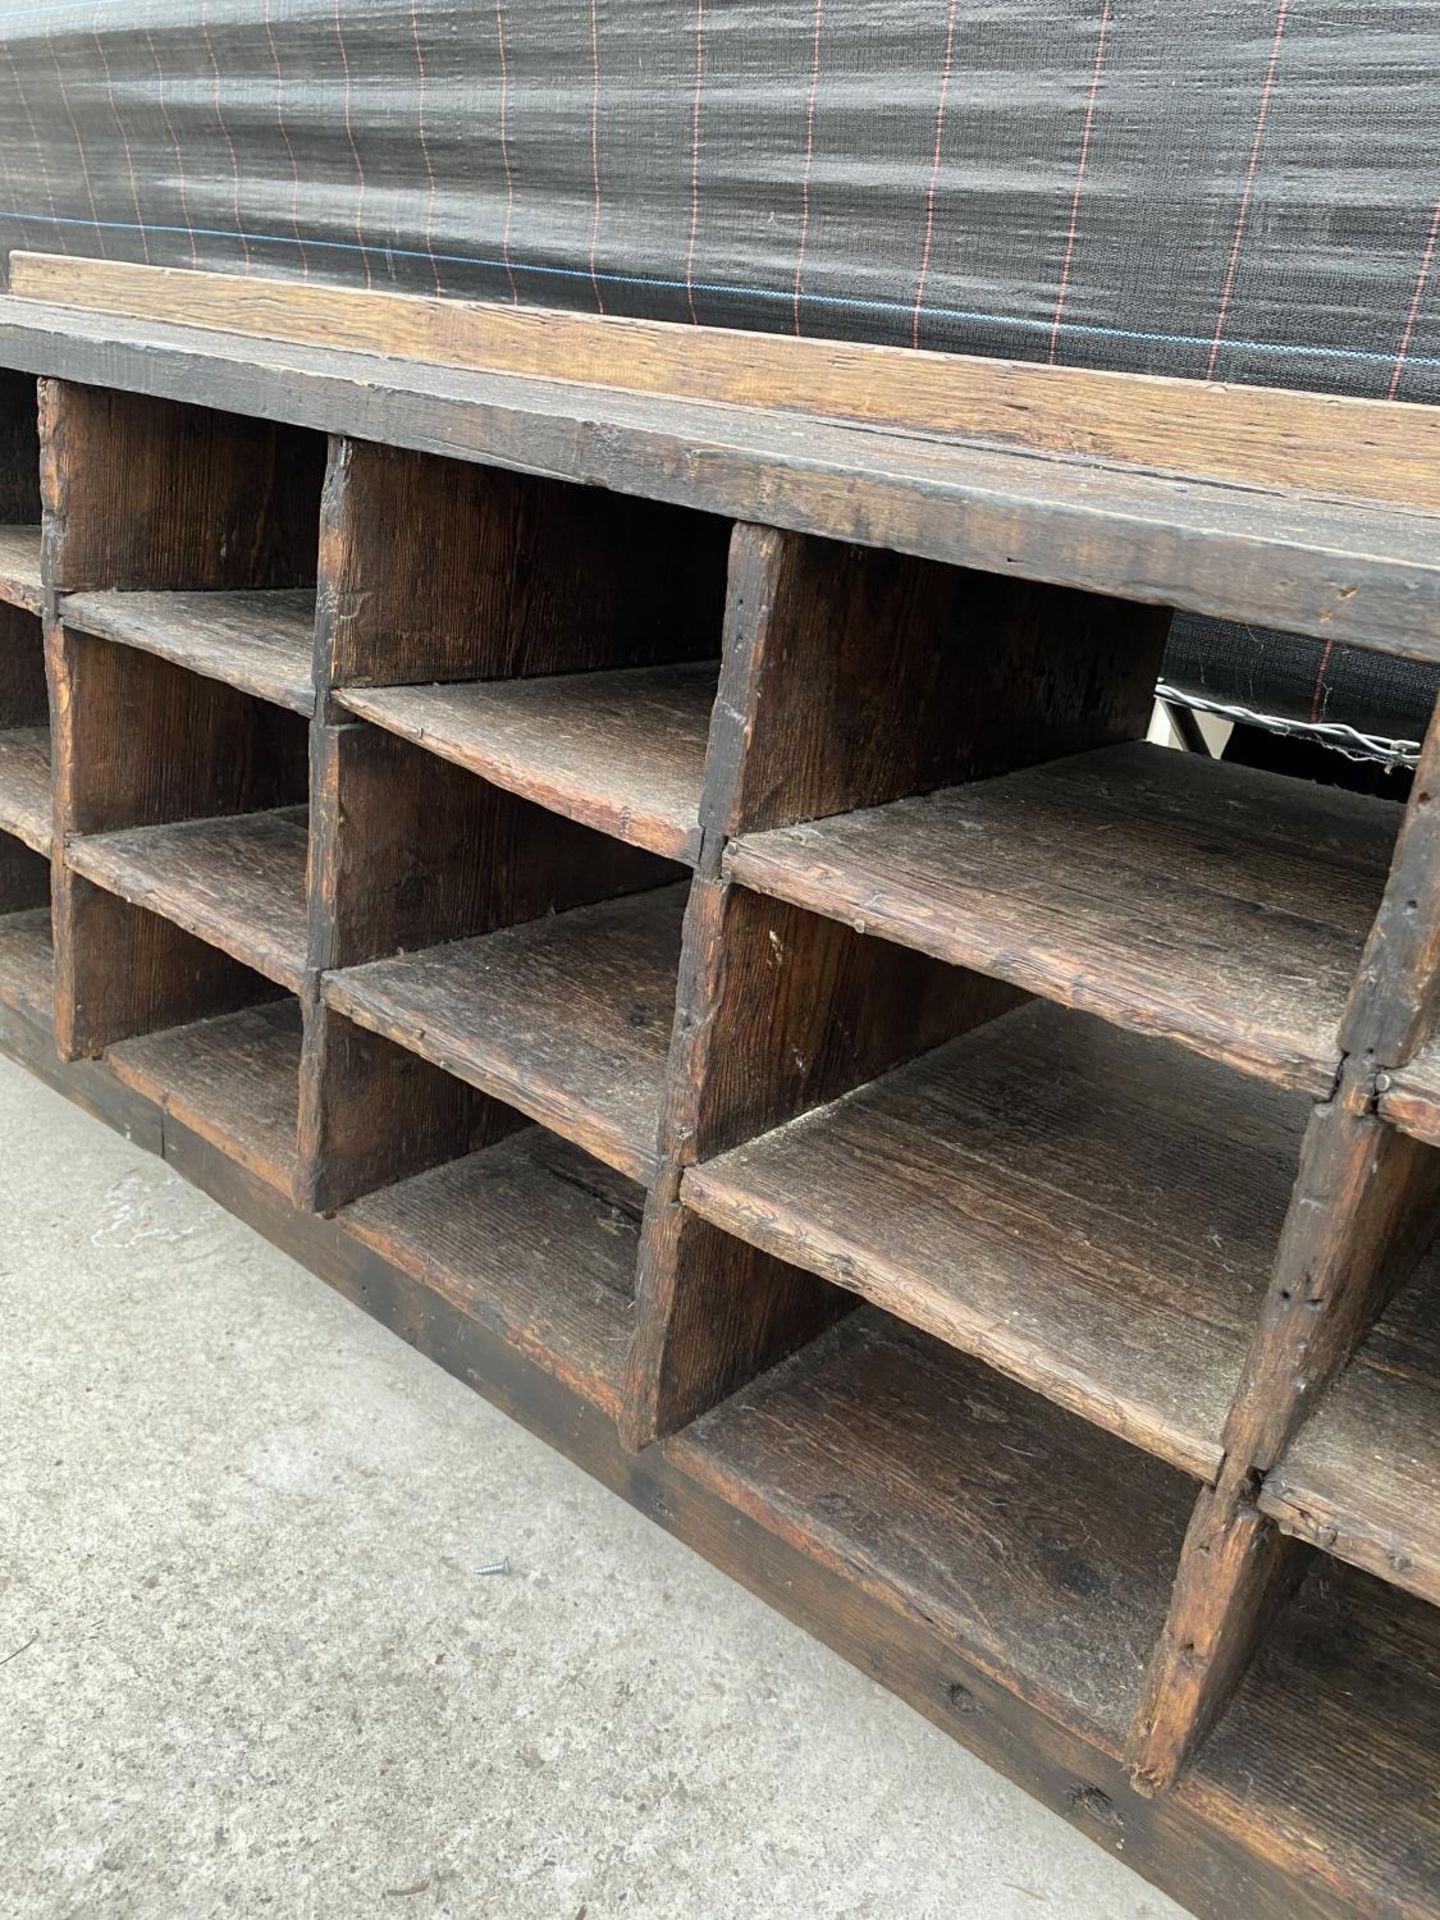 A VINTAGE WOODEN 21 SECTION PIGEON HOLE STORAGE BENCH - Image 3 of 5